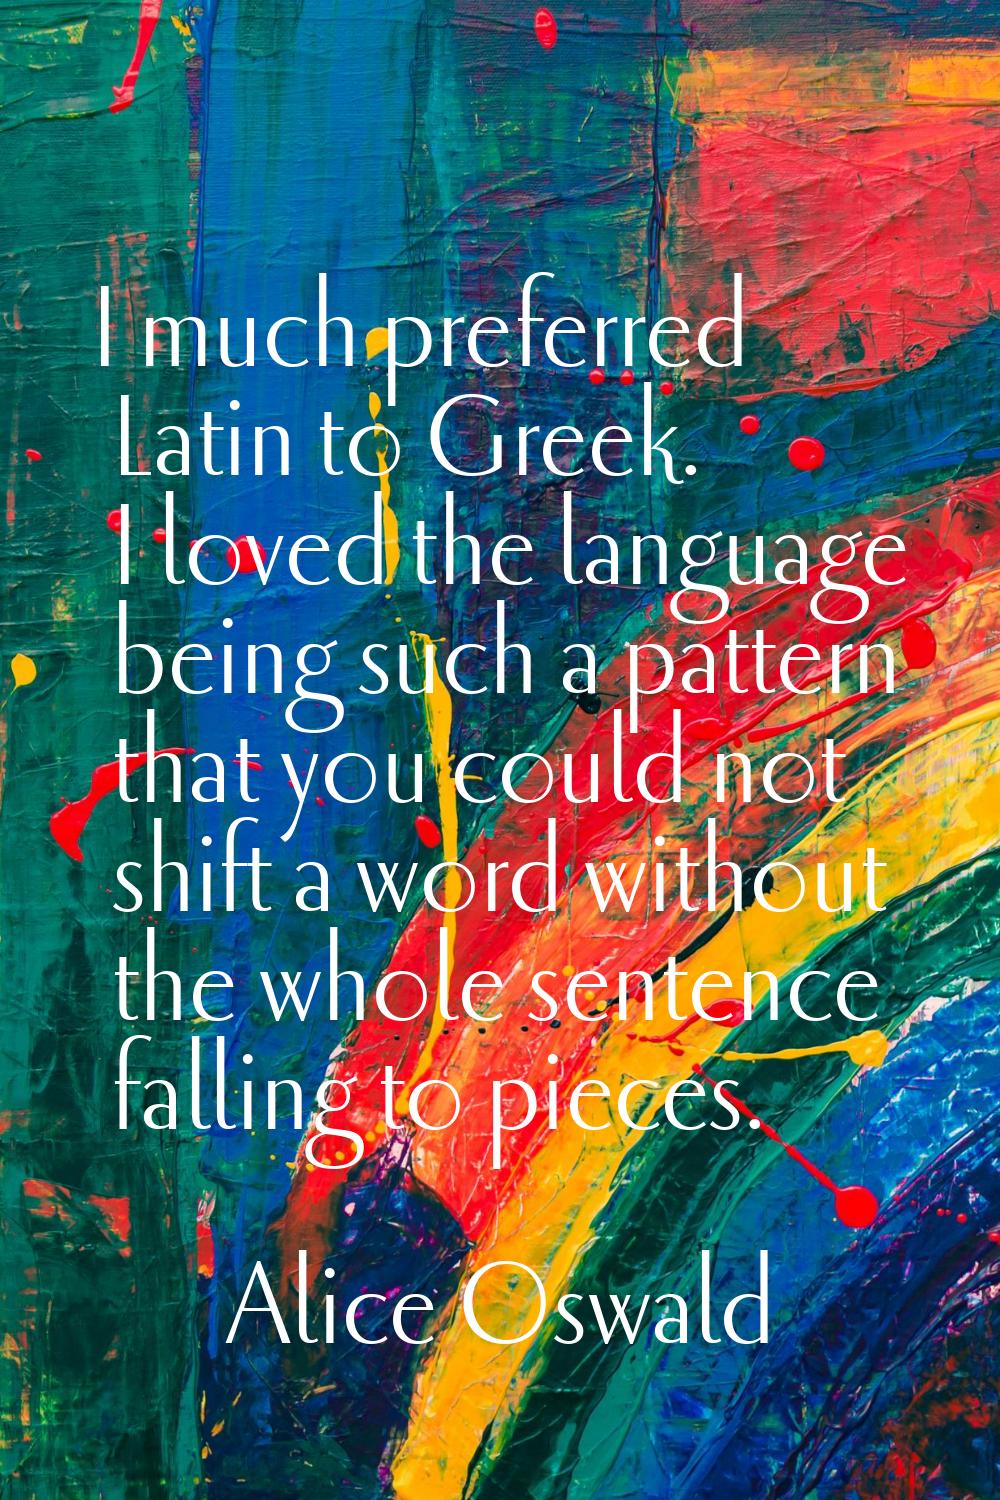 I much preferred Latin to Greek. I loved the language being such a pattern that you could not shift